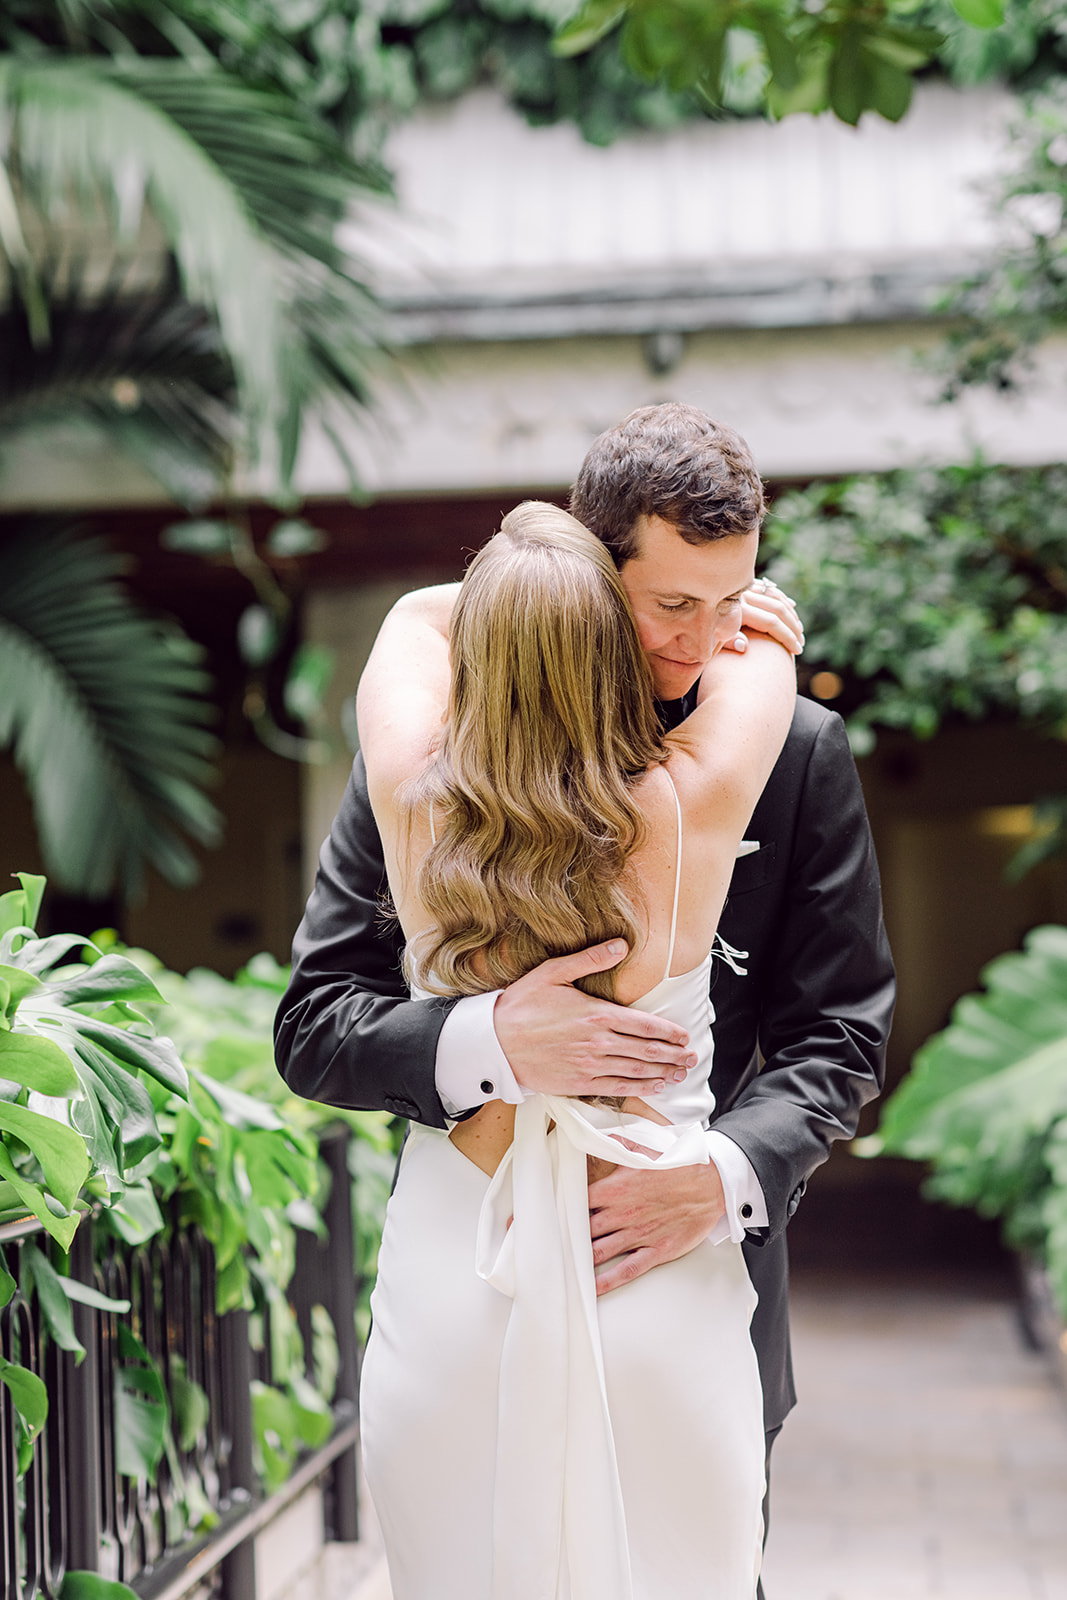 Bride & groom embrace during first look at Mayfair House Hotel & Garden in Miami on wedding day.